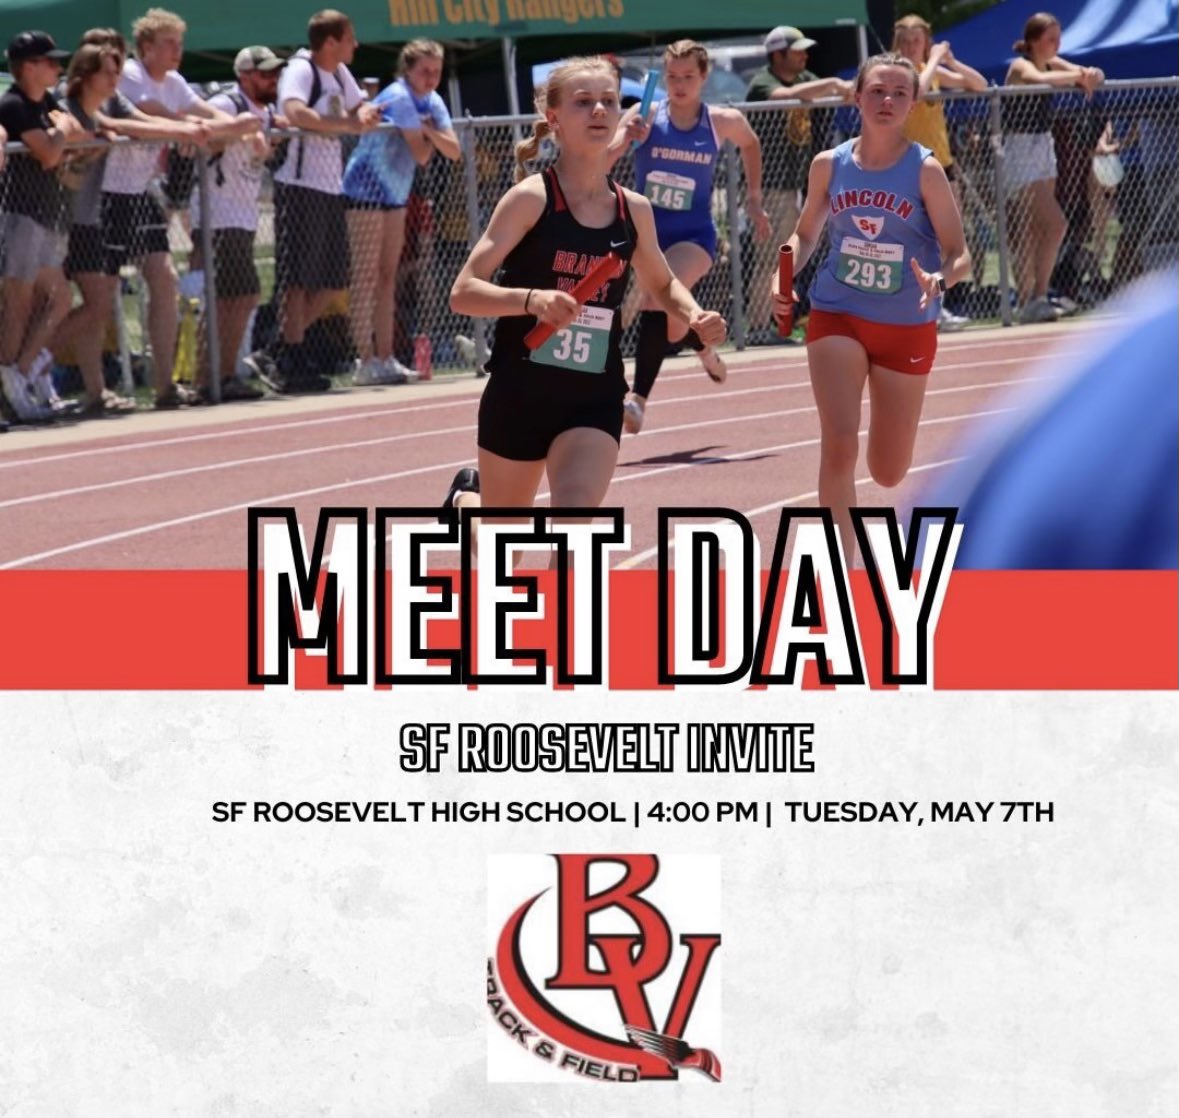 It’s Meet Day! Come out and watch our TF athletes competing at SF Roosevelt High School in the SF Roosevelt Quad! Field Events start at 2 pm and Running Events at 4 pm. You can get meet updates here and results at results.dakotatiming.com